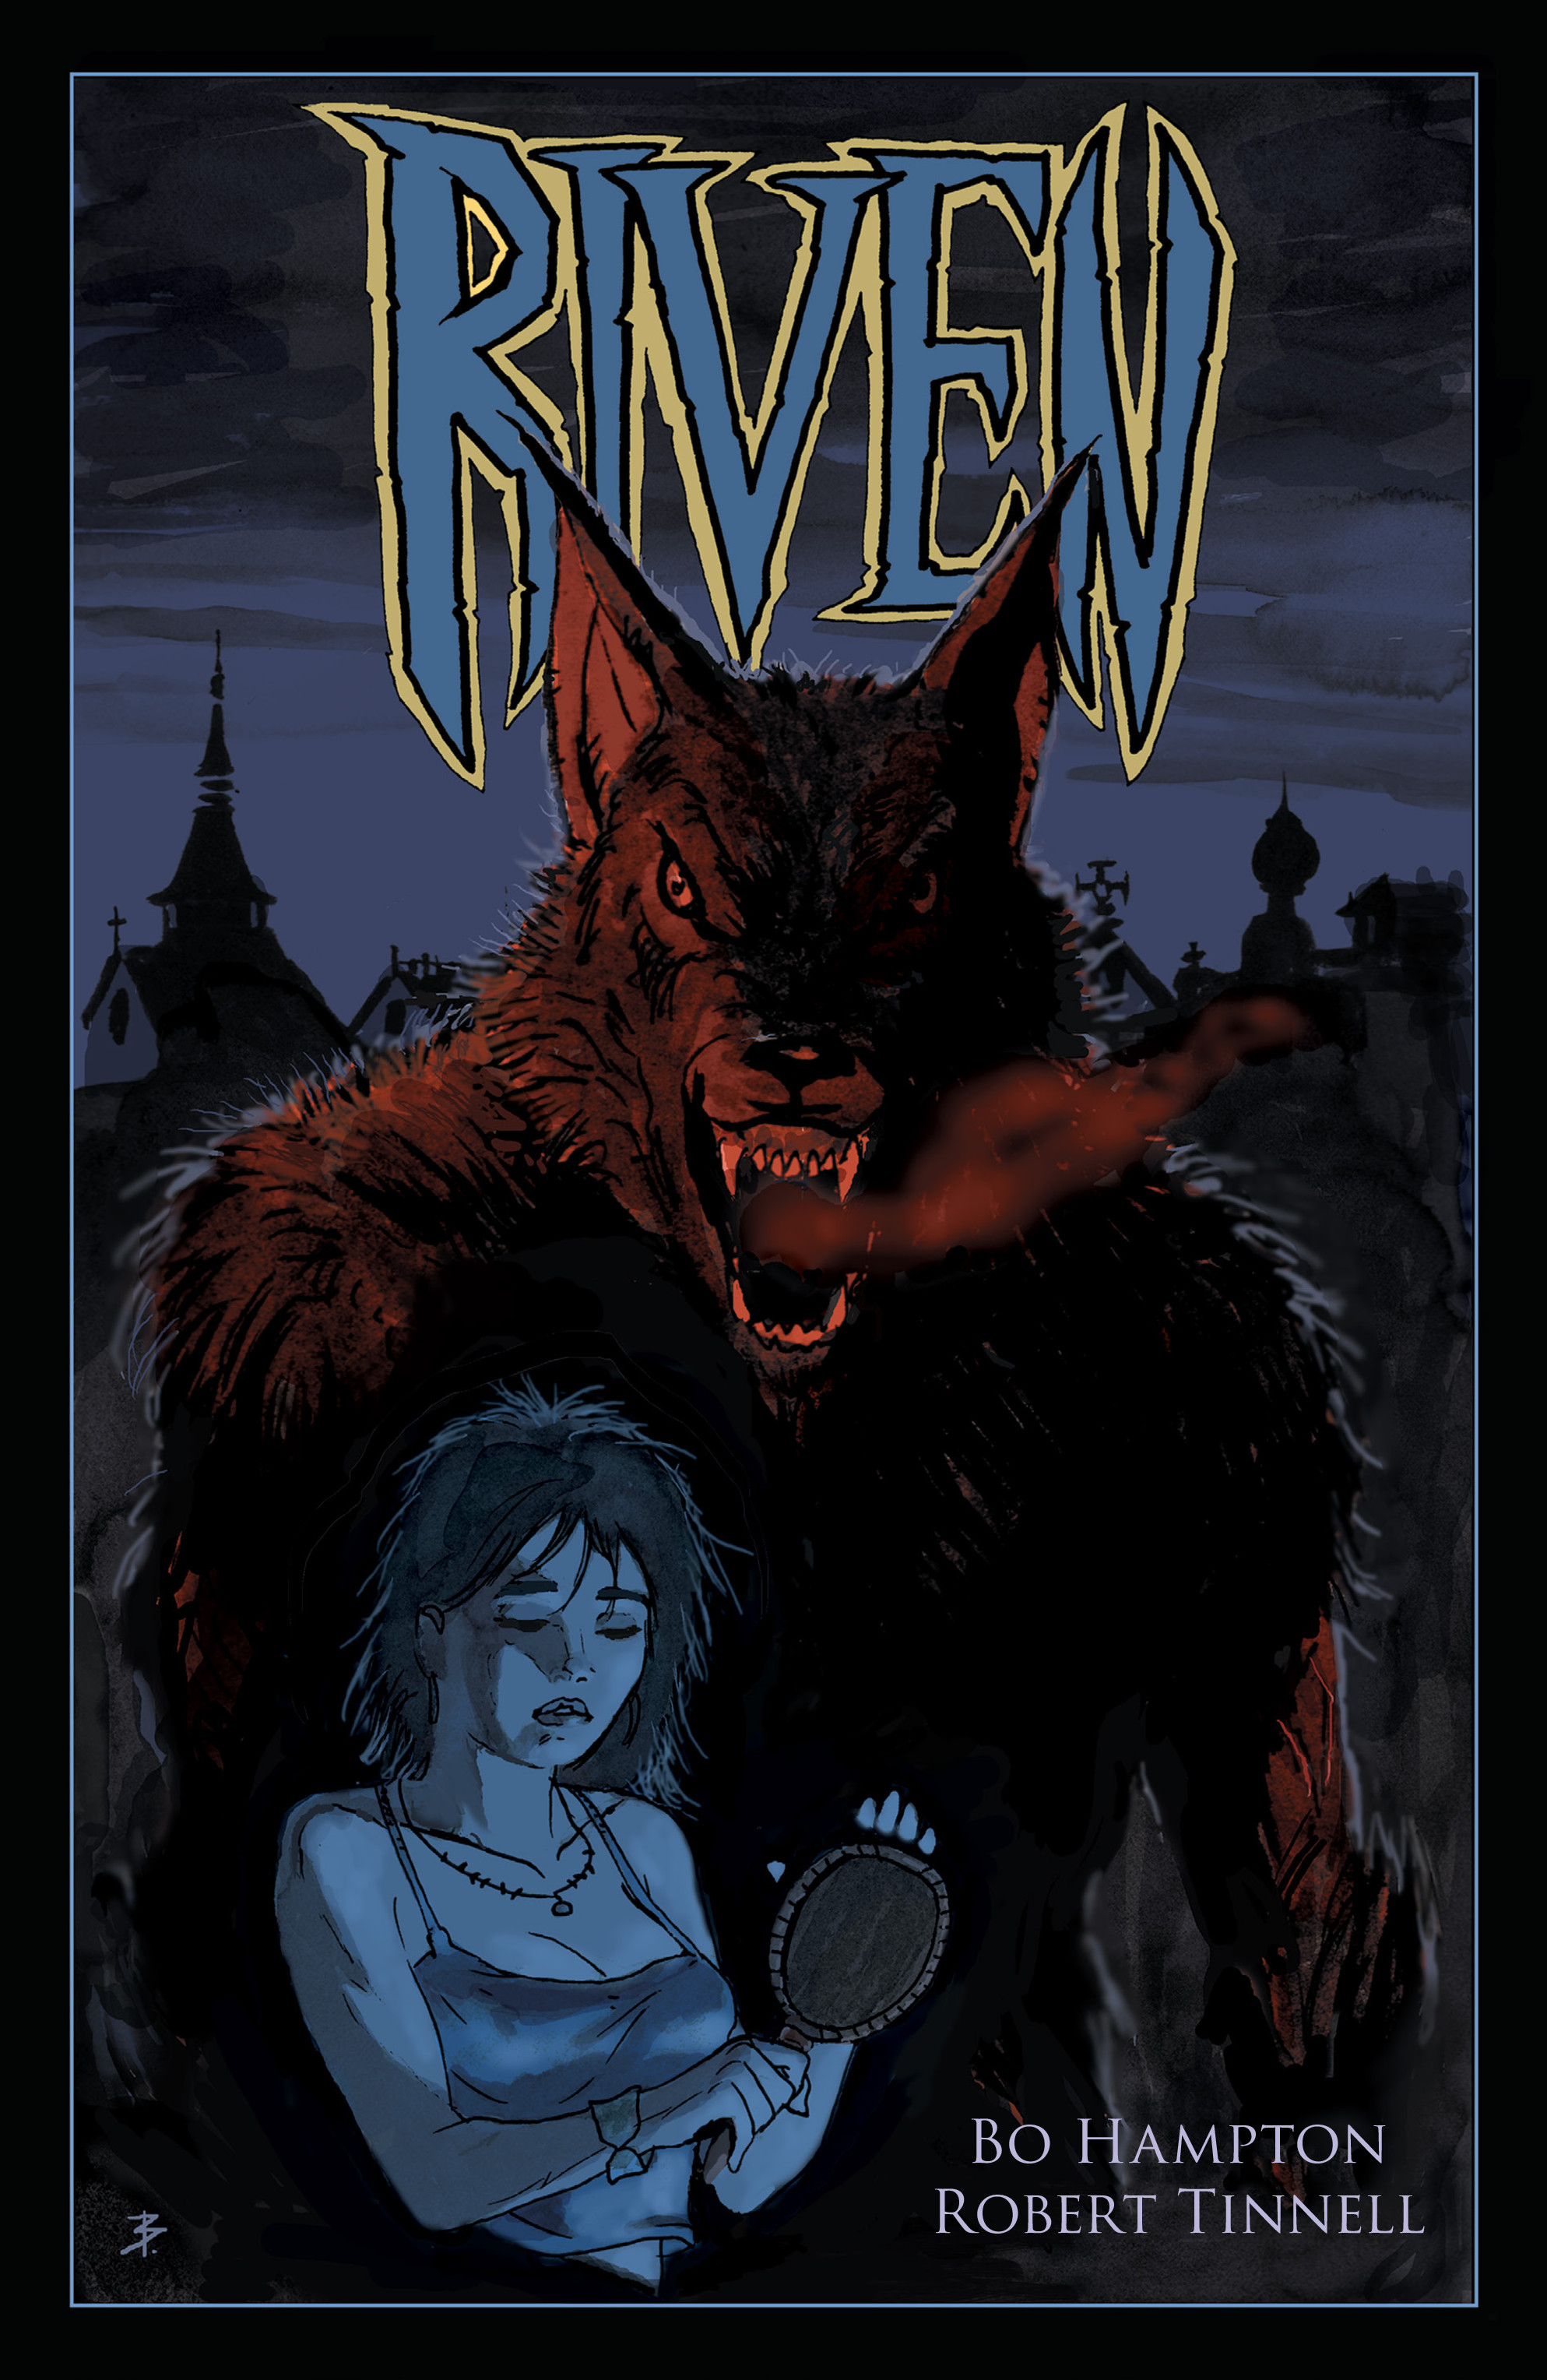 Read online Riven comic -  Issue # TPB (Part 1) - 1